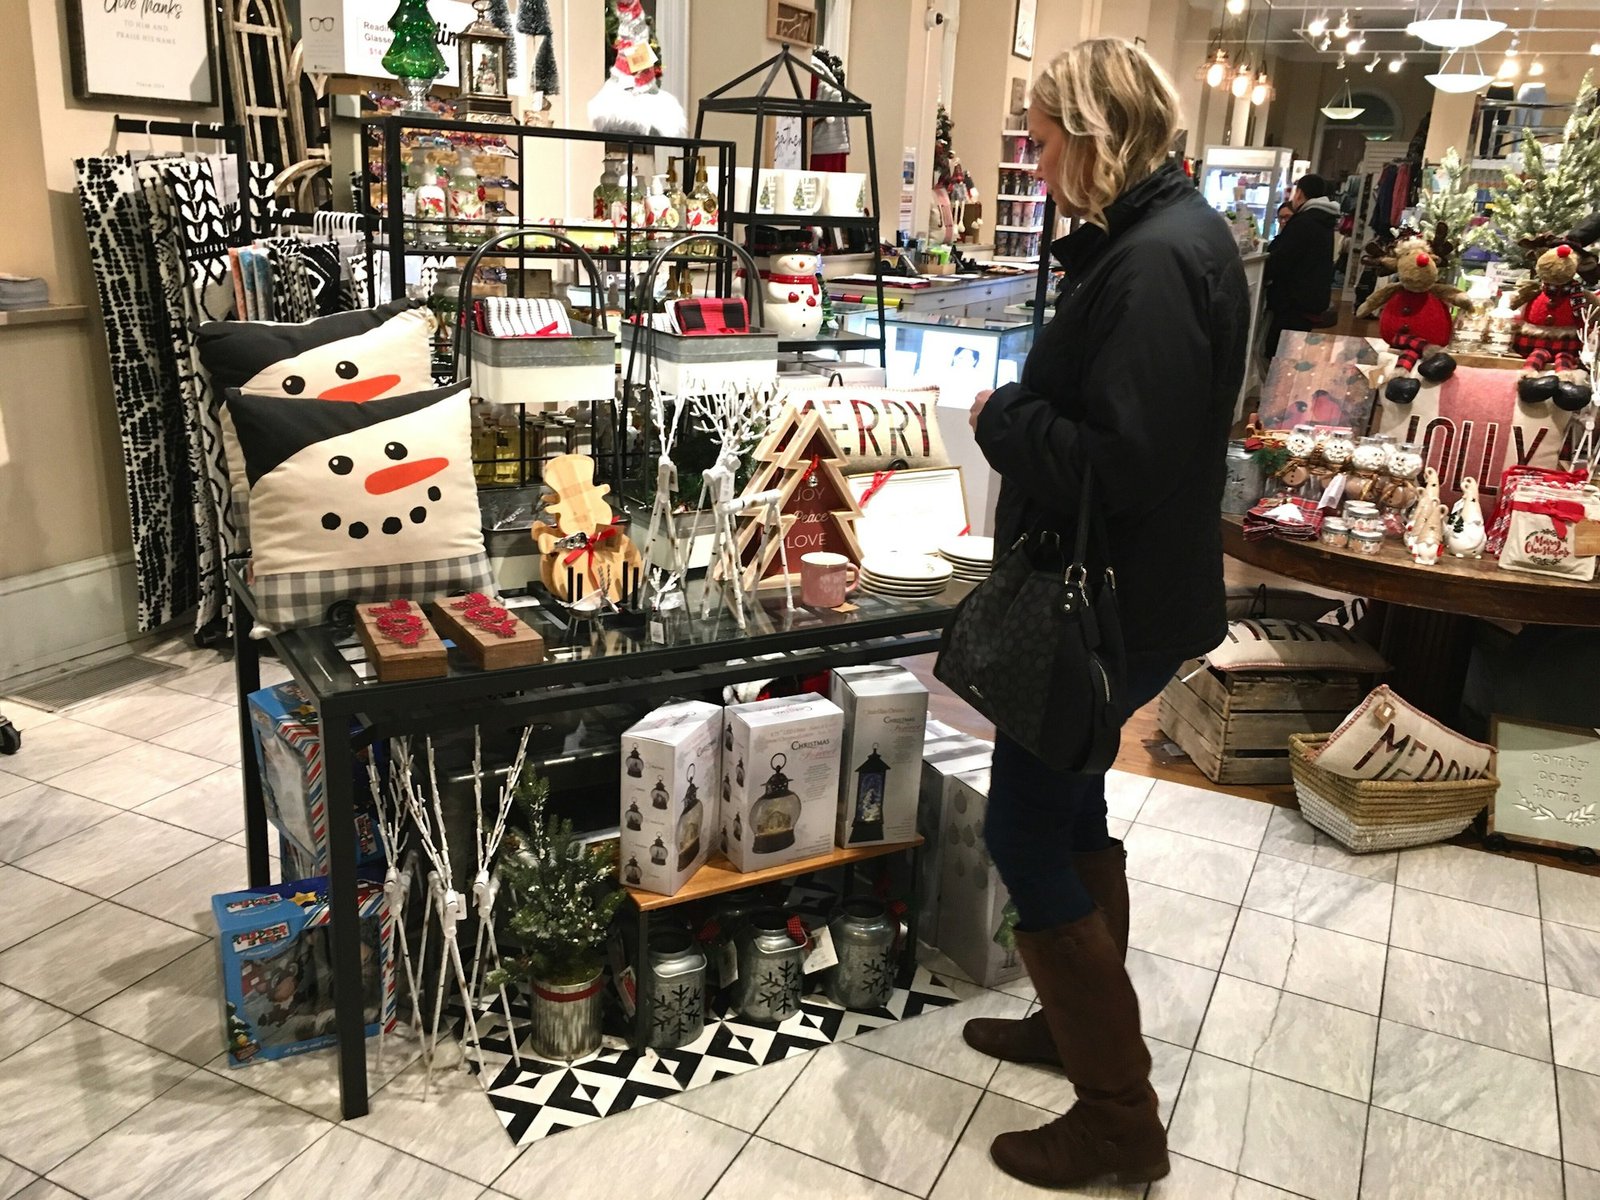 Woman shopping local for Christmas to support local retailers